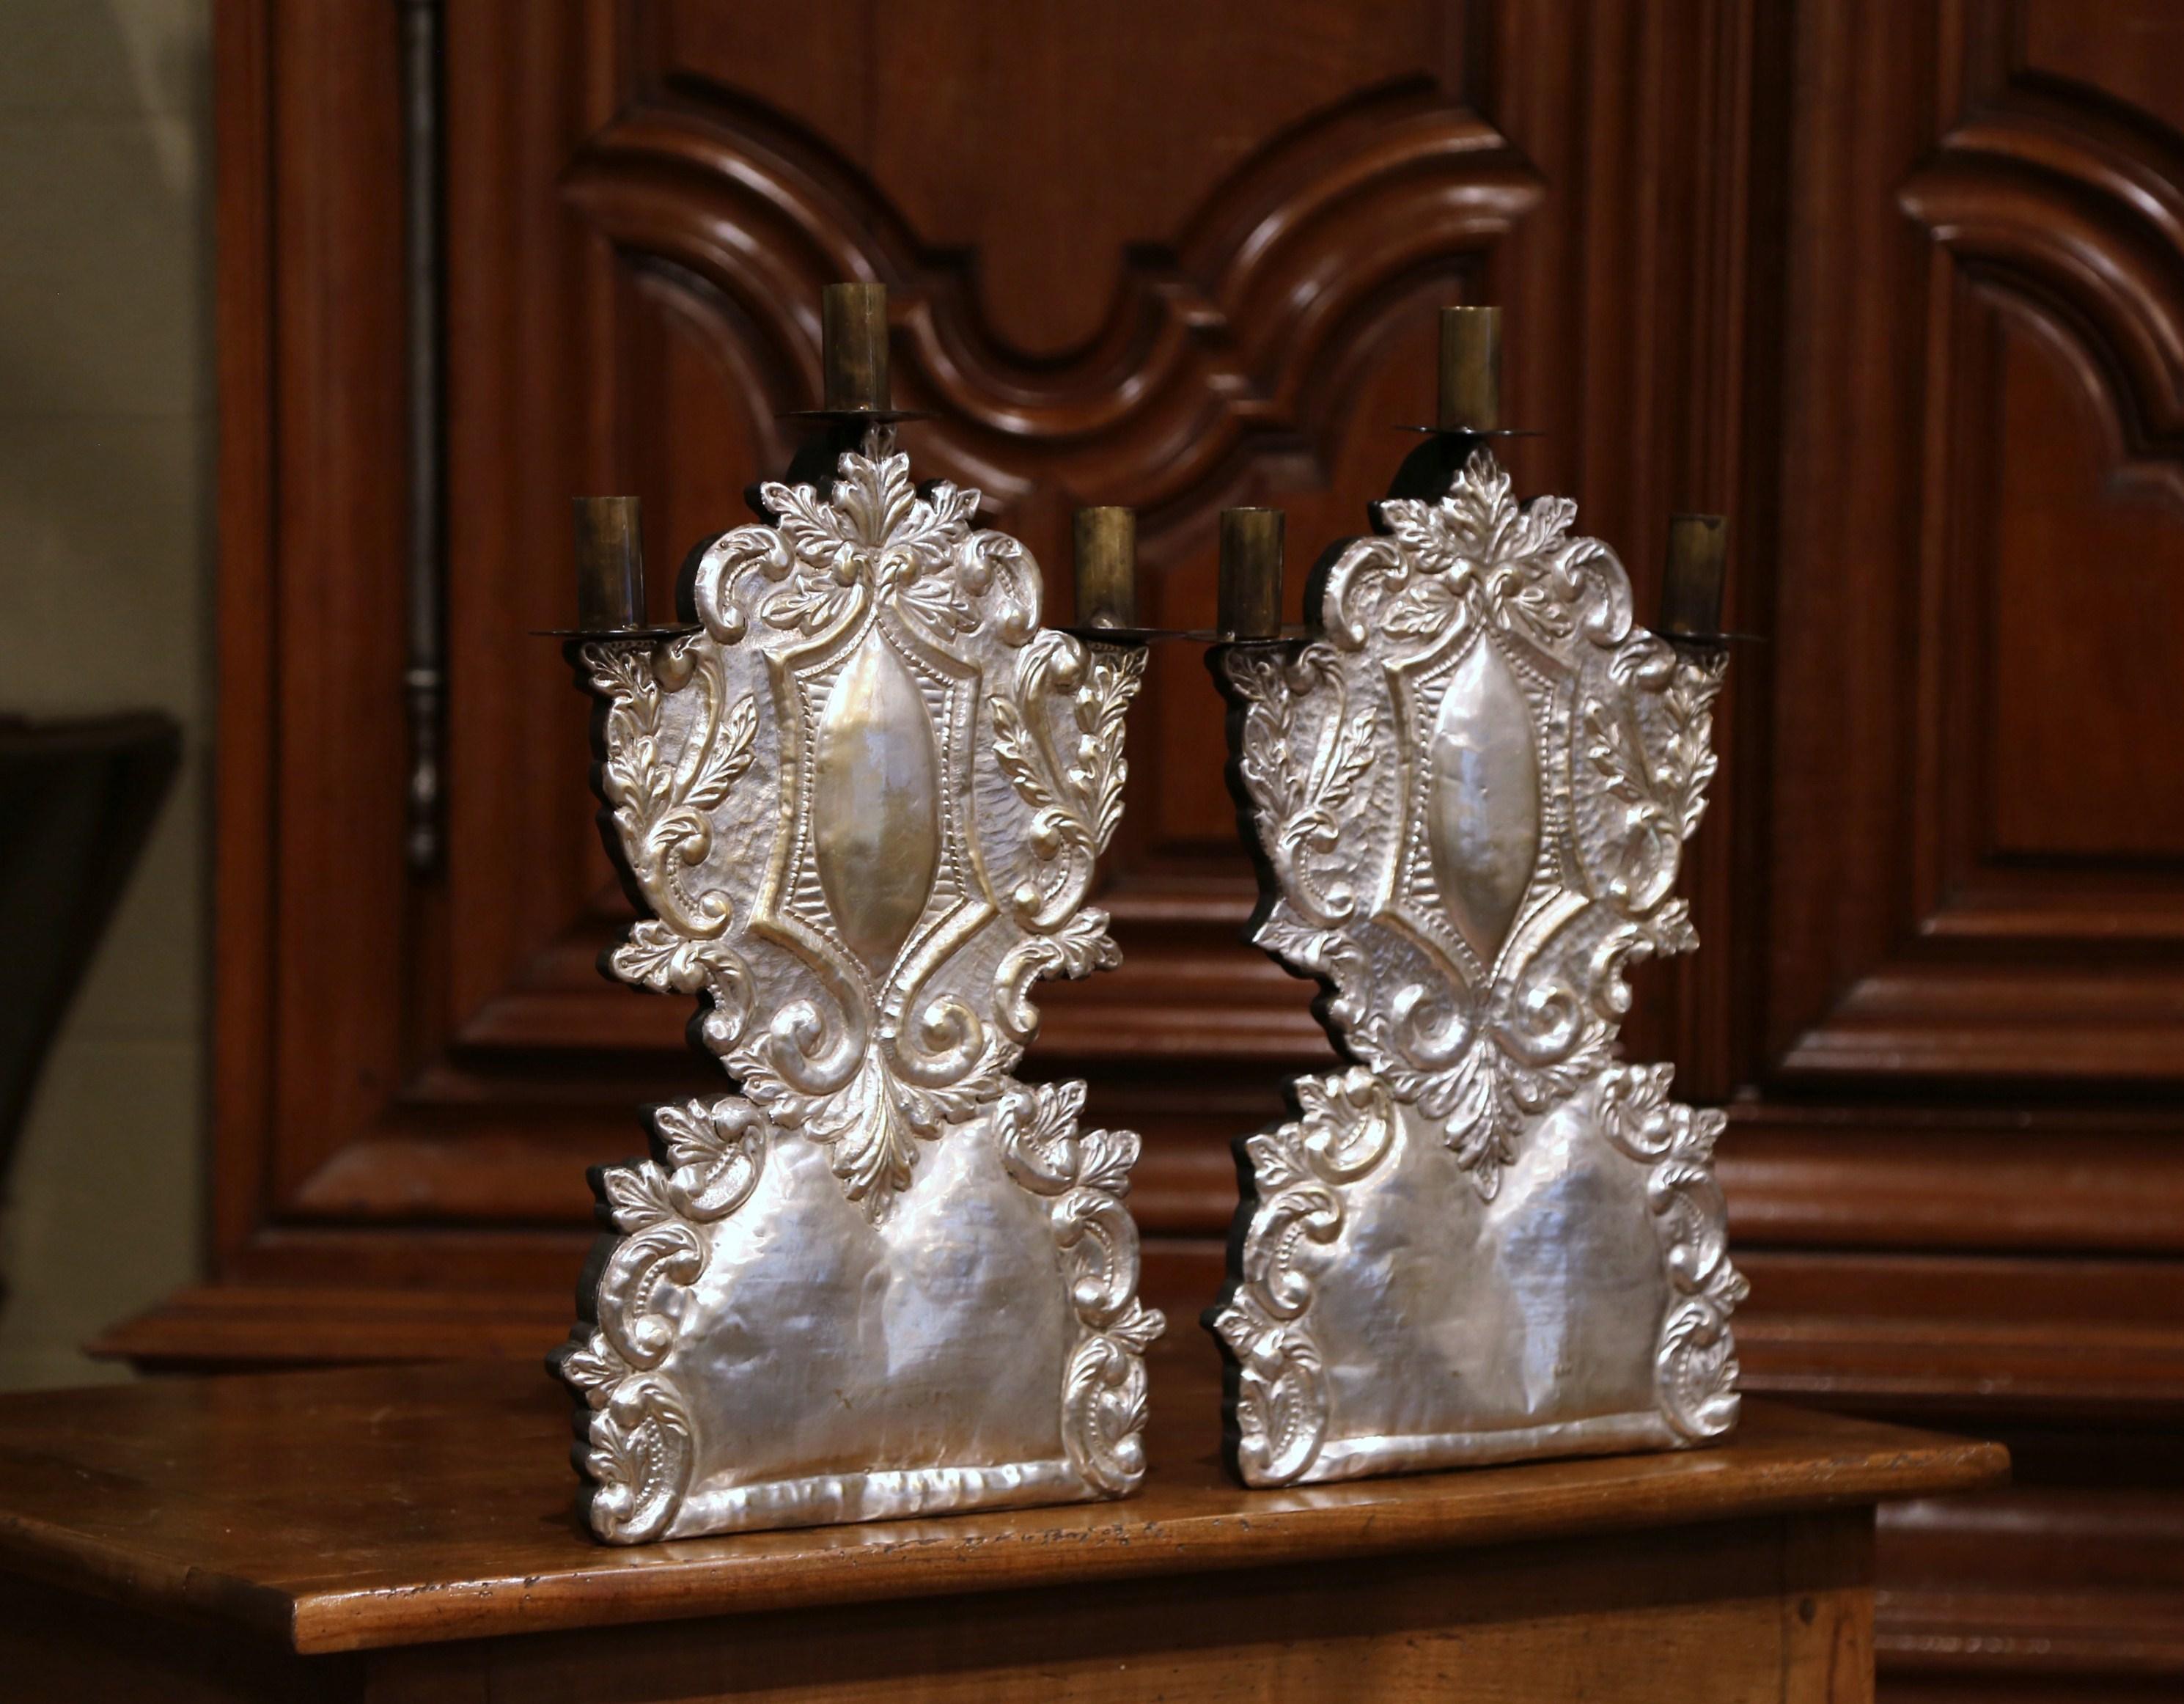 Decorate a buffet or embellish a console with this pair of elegant, Italian candelabras. Crafted in Italy circa 1950, each wooden candlestick is dressed with a silver over brass covering for an elegant, dramatic look. The light fixtures are